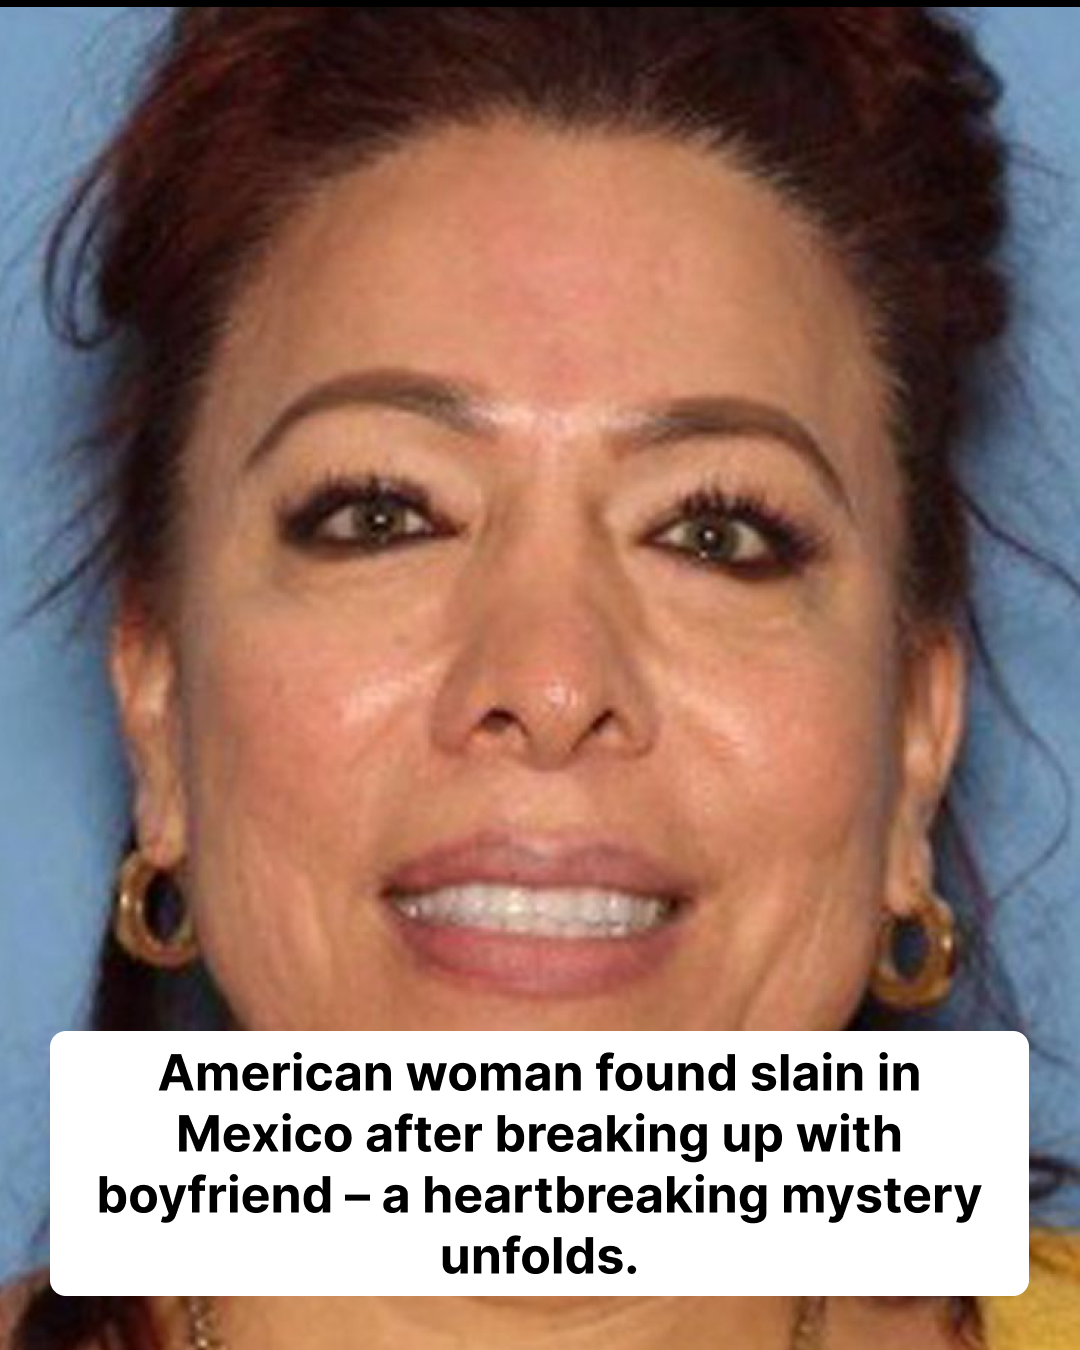 She Was Meeting a Man to Finalize Their Breakup. Police Say He Killed Her and Drove Body to Mexican Cemetery